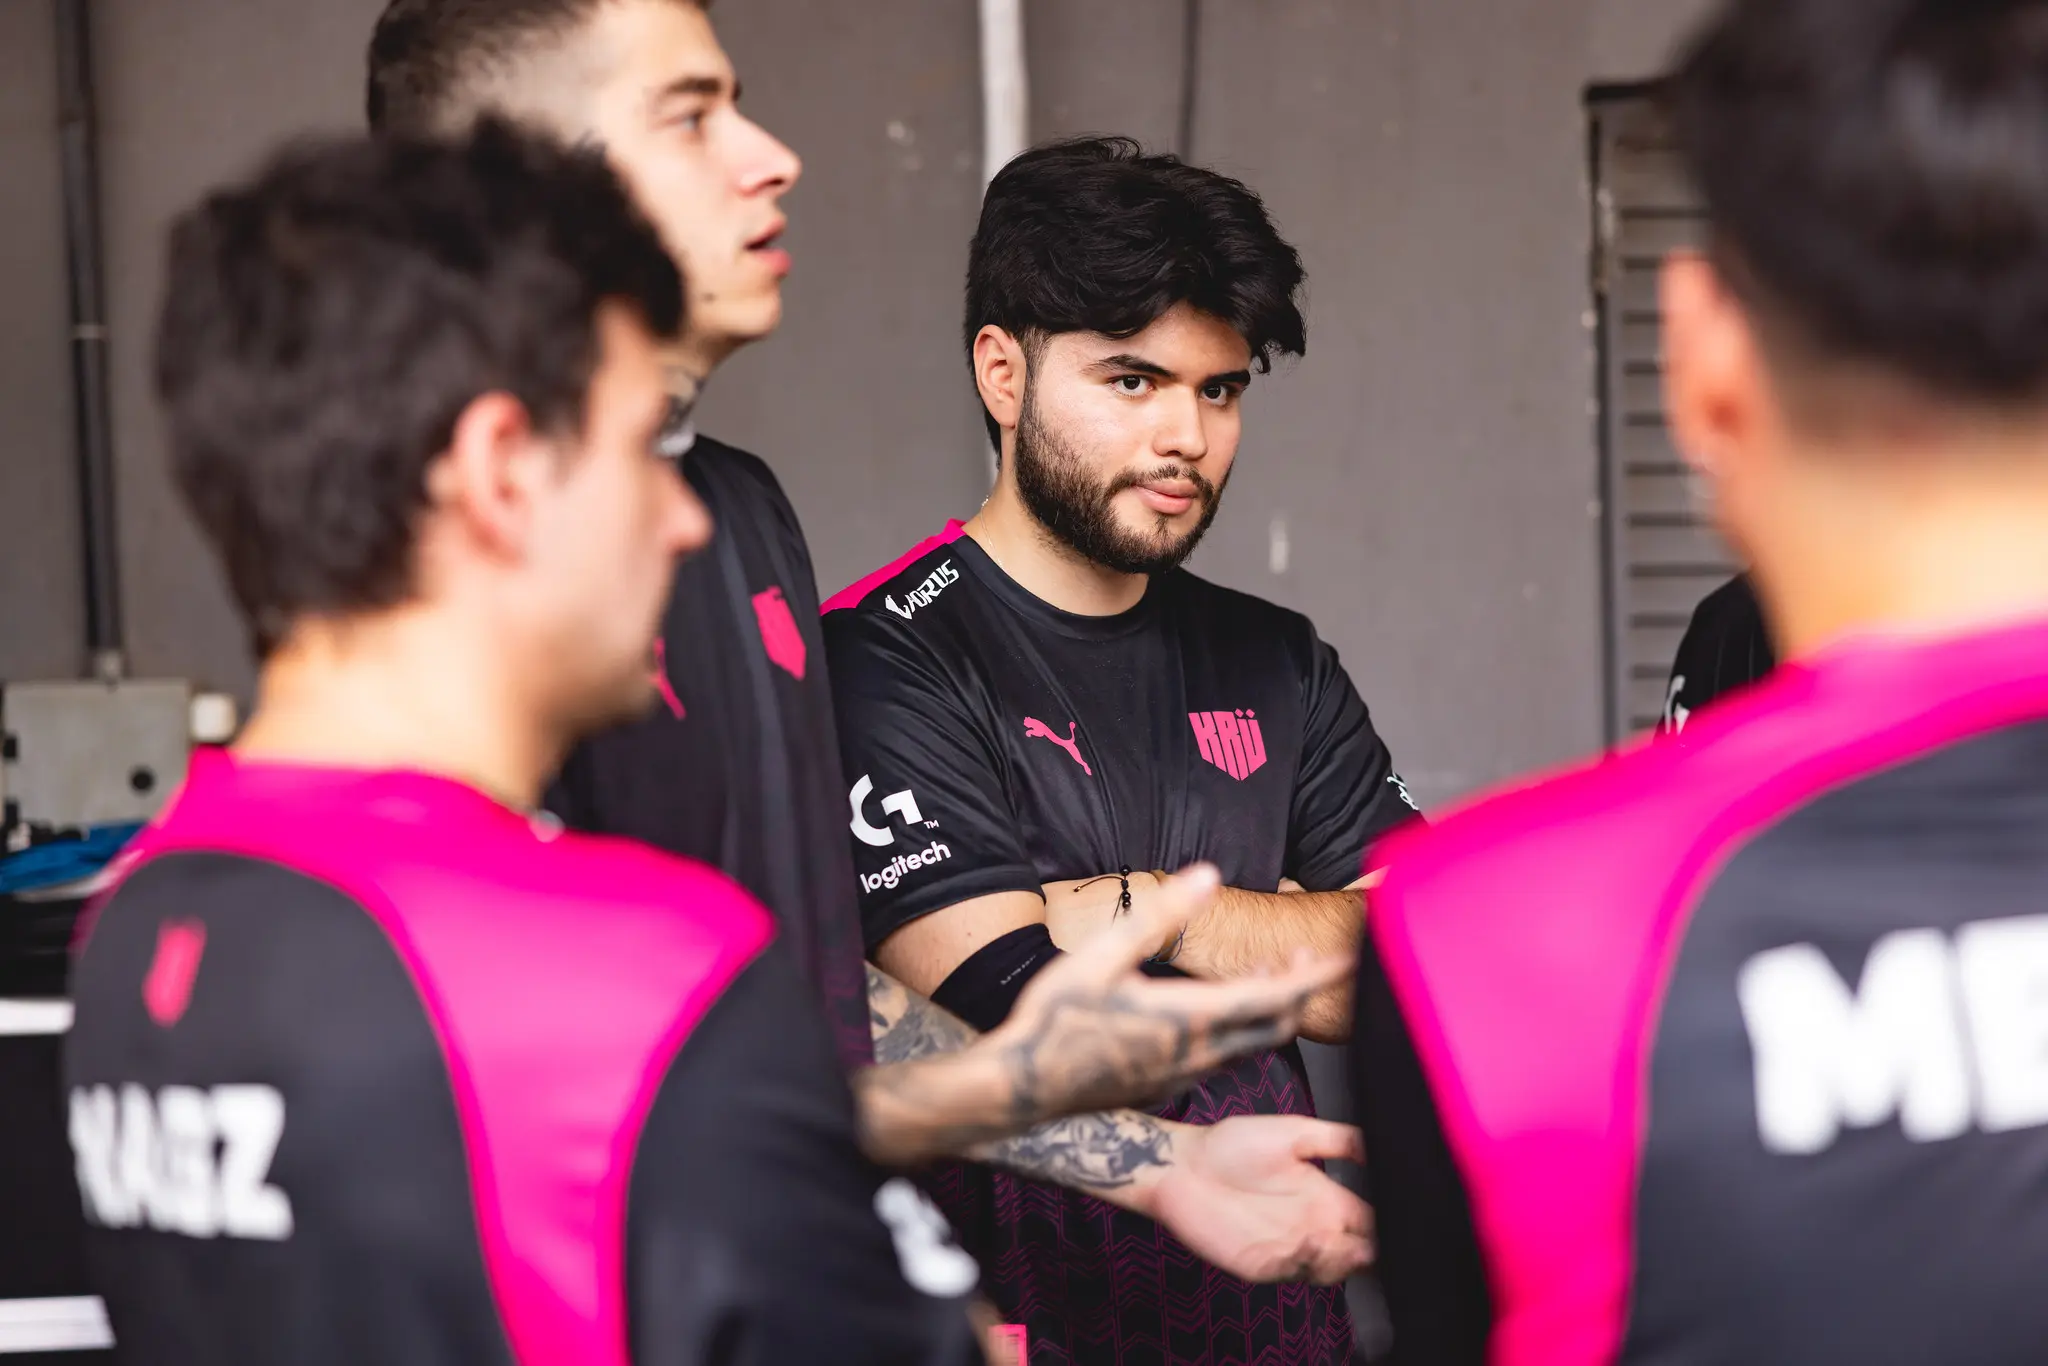 Santiago "Daveeys" Ruiz of KRU Esports huddles with team at the VALORANT Champions Tour 2023: LOCK//IN Groups Stage on February 22, 2023 in Sao Paulo, Brazil.